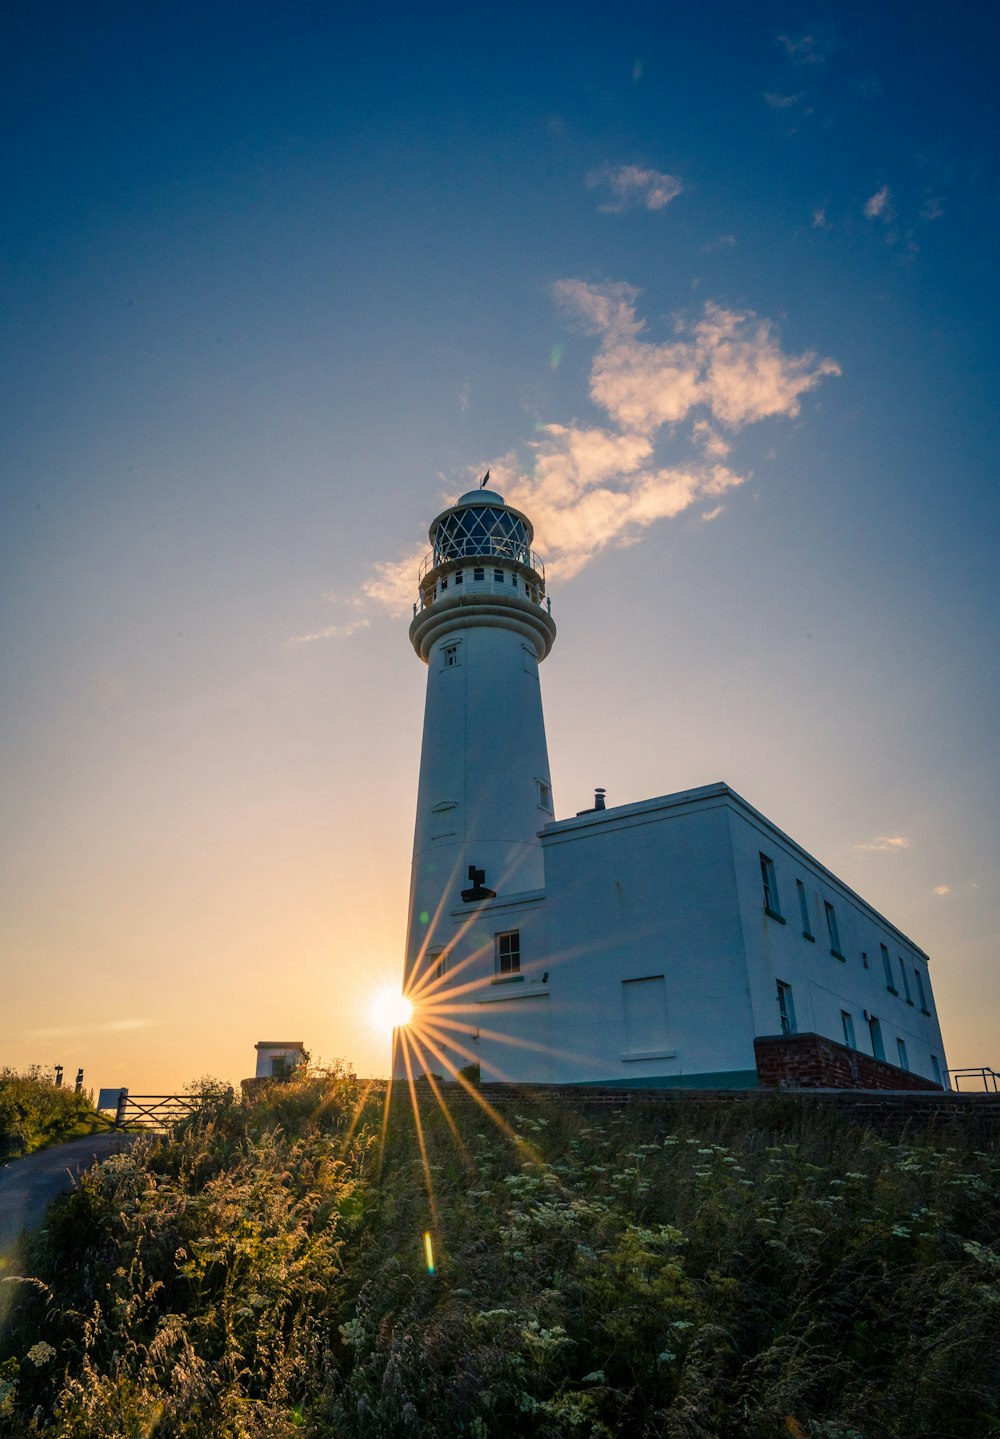 the sun is setting behind a lighthouse on a hill